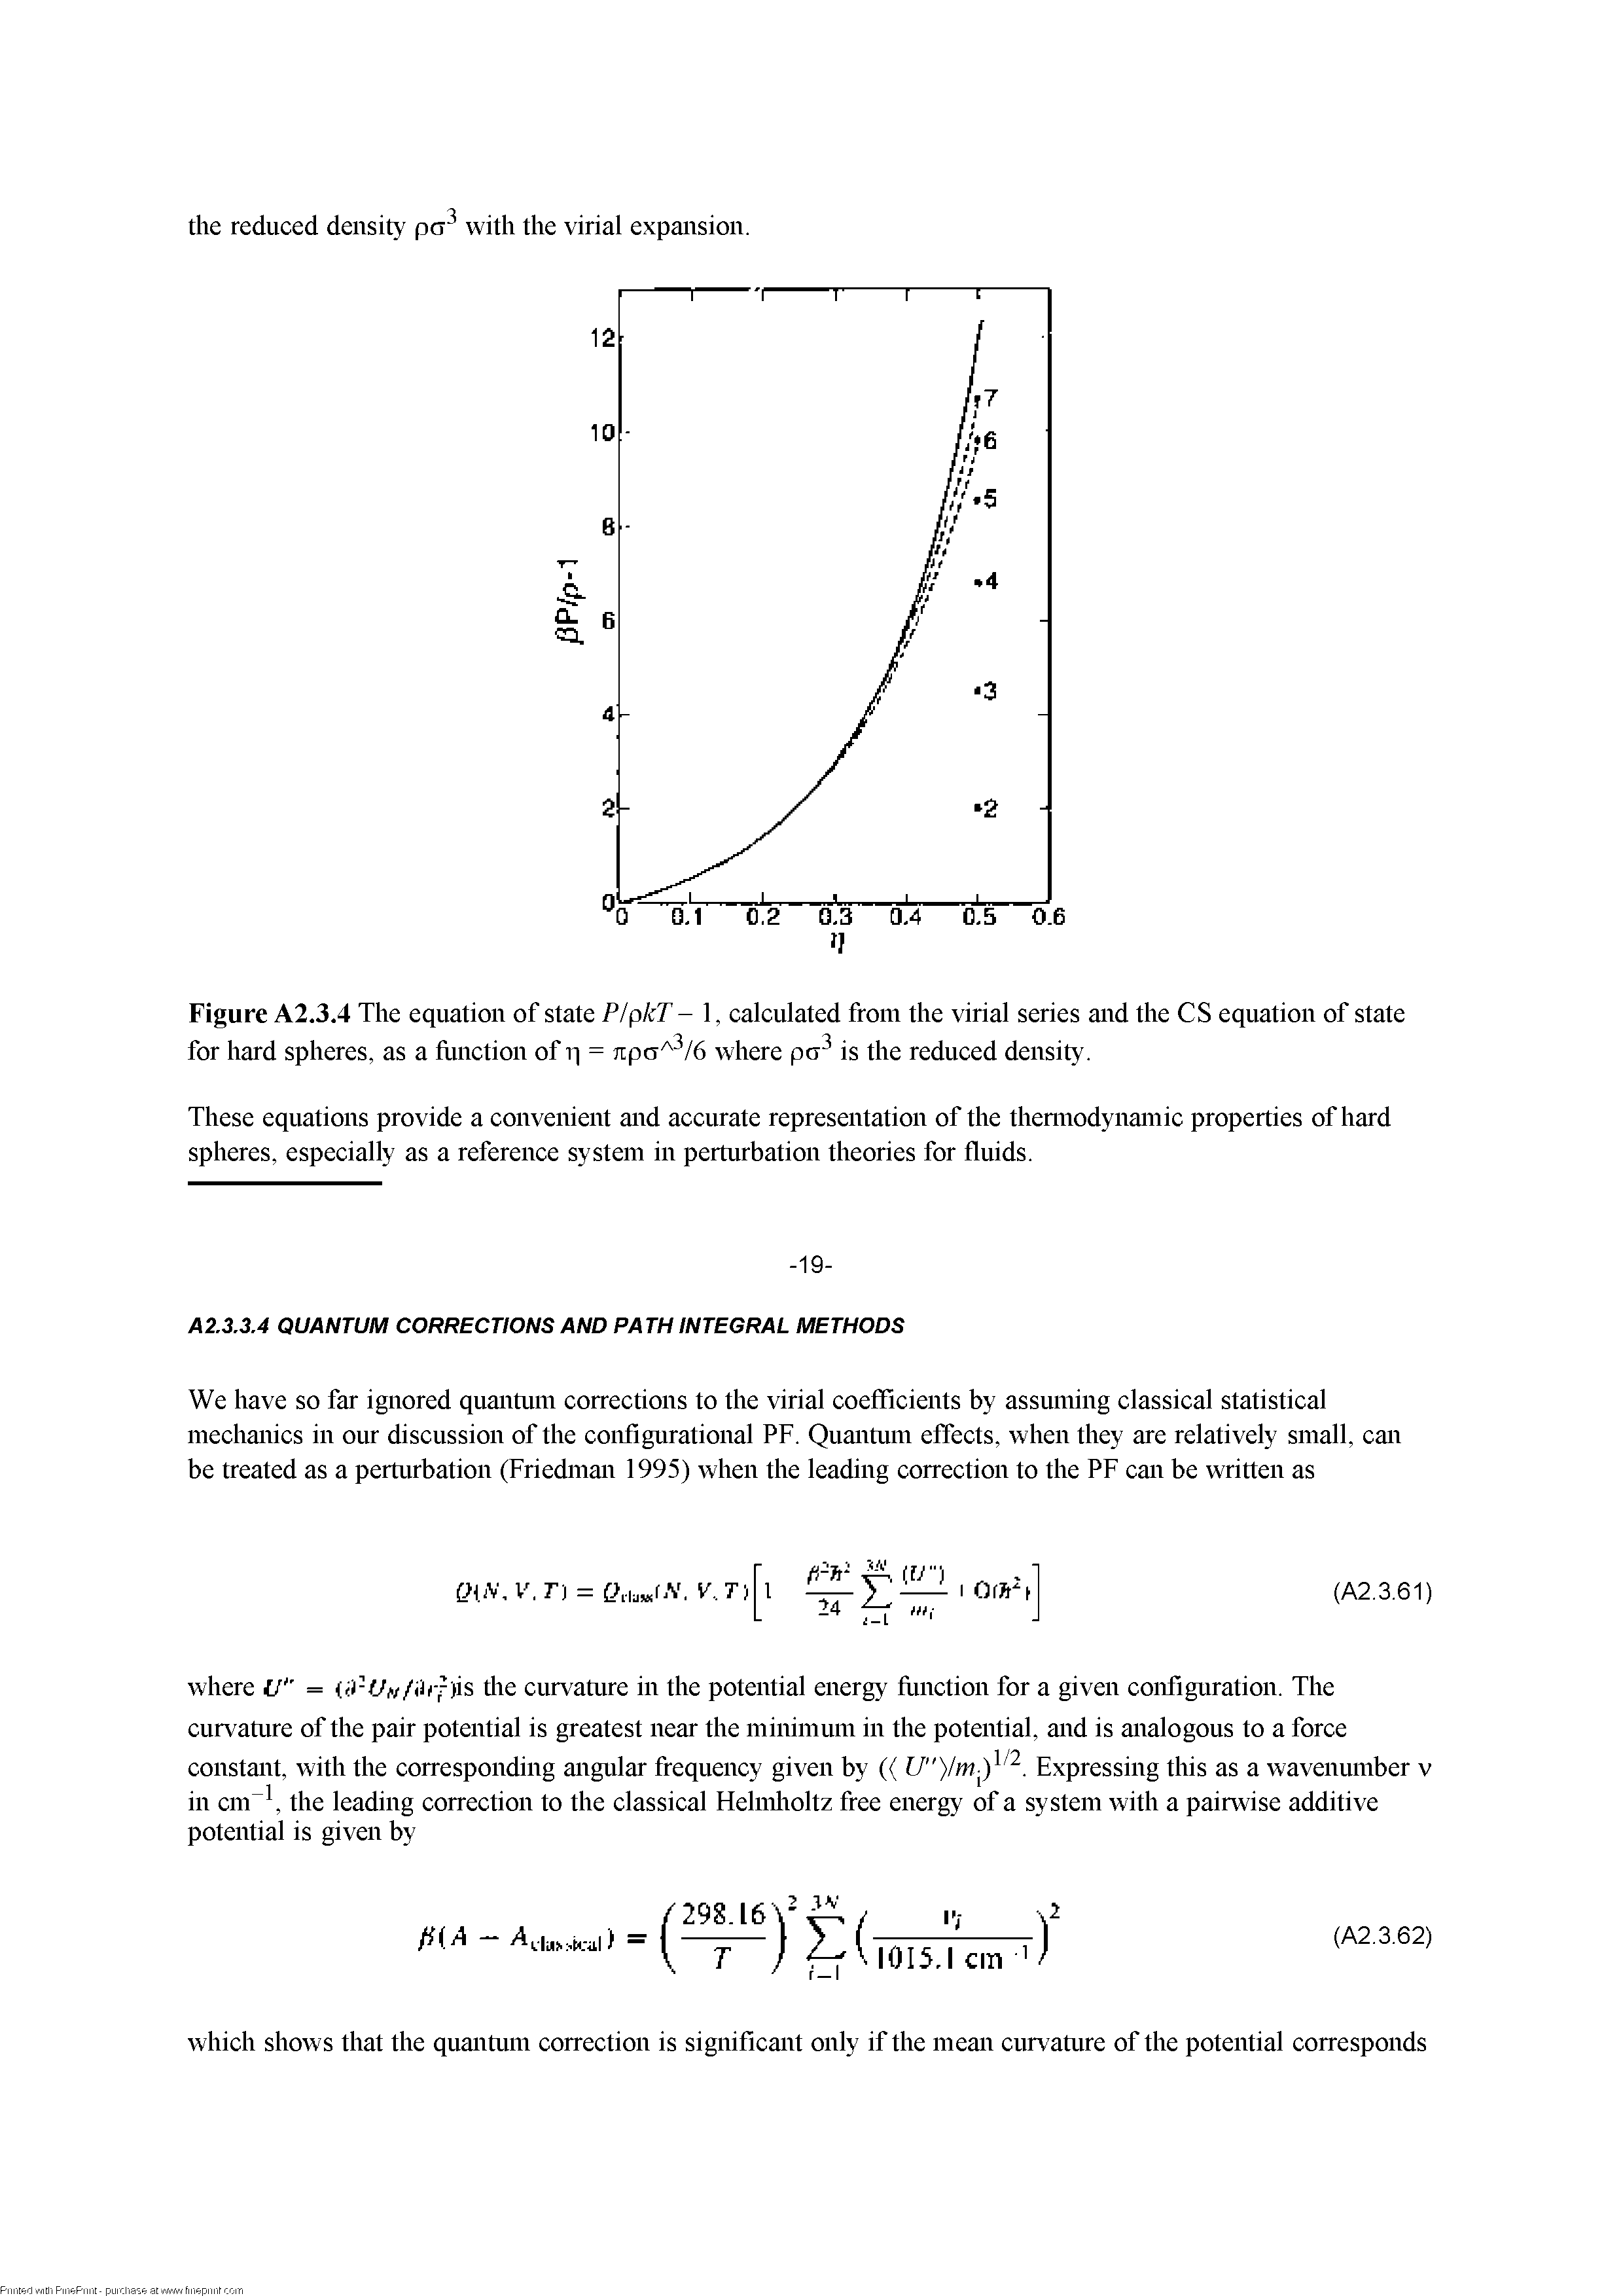 Figure A2.3.4 The equation of state P/pkT- 1, calculated from the virial series and the CS equation of state for hard spheres, as a fimction of q = where pa is the reduced density.